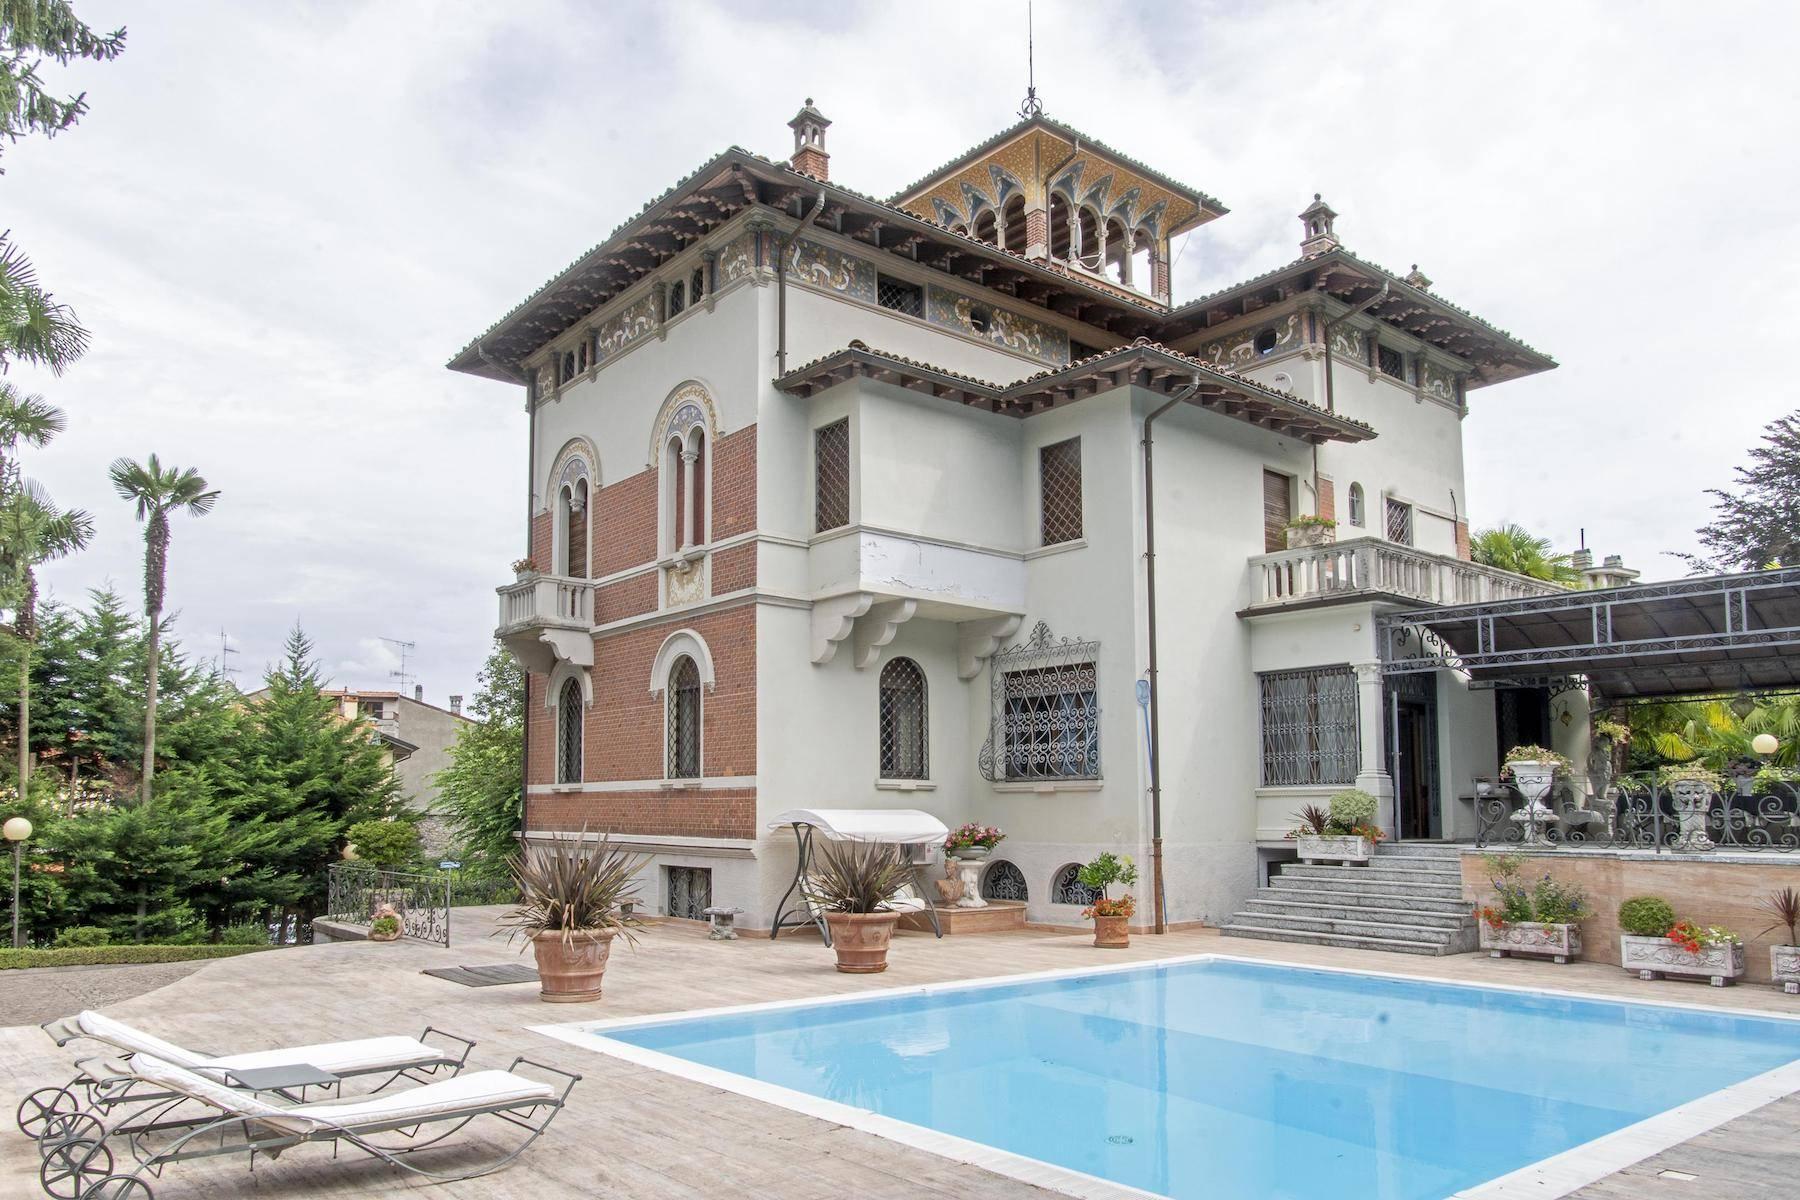 Majestic period villa with swimming pool and tower in the heart of Stresa - 41